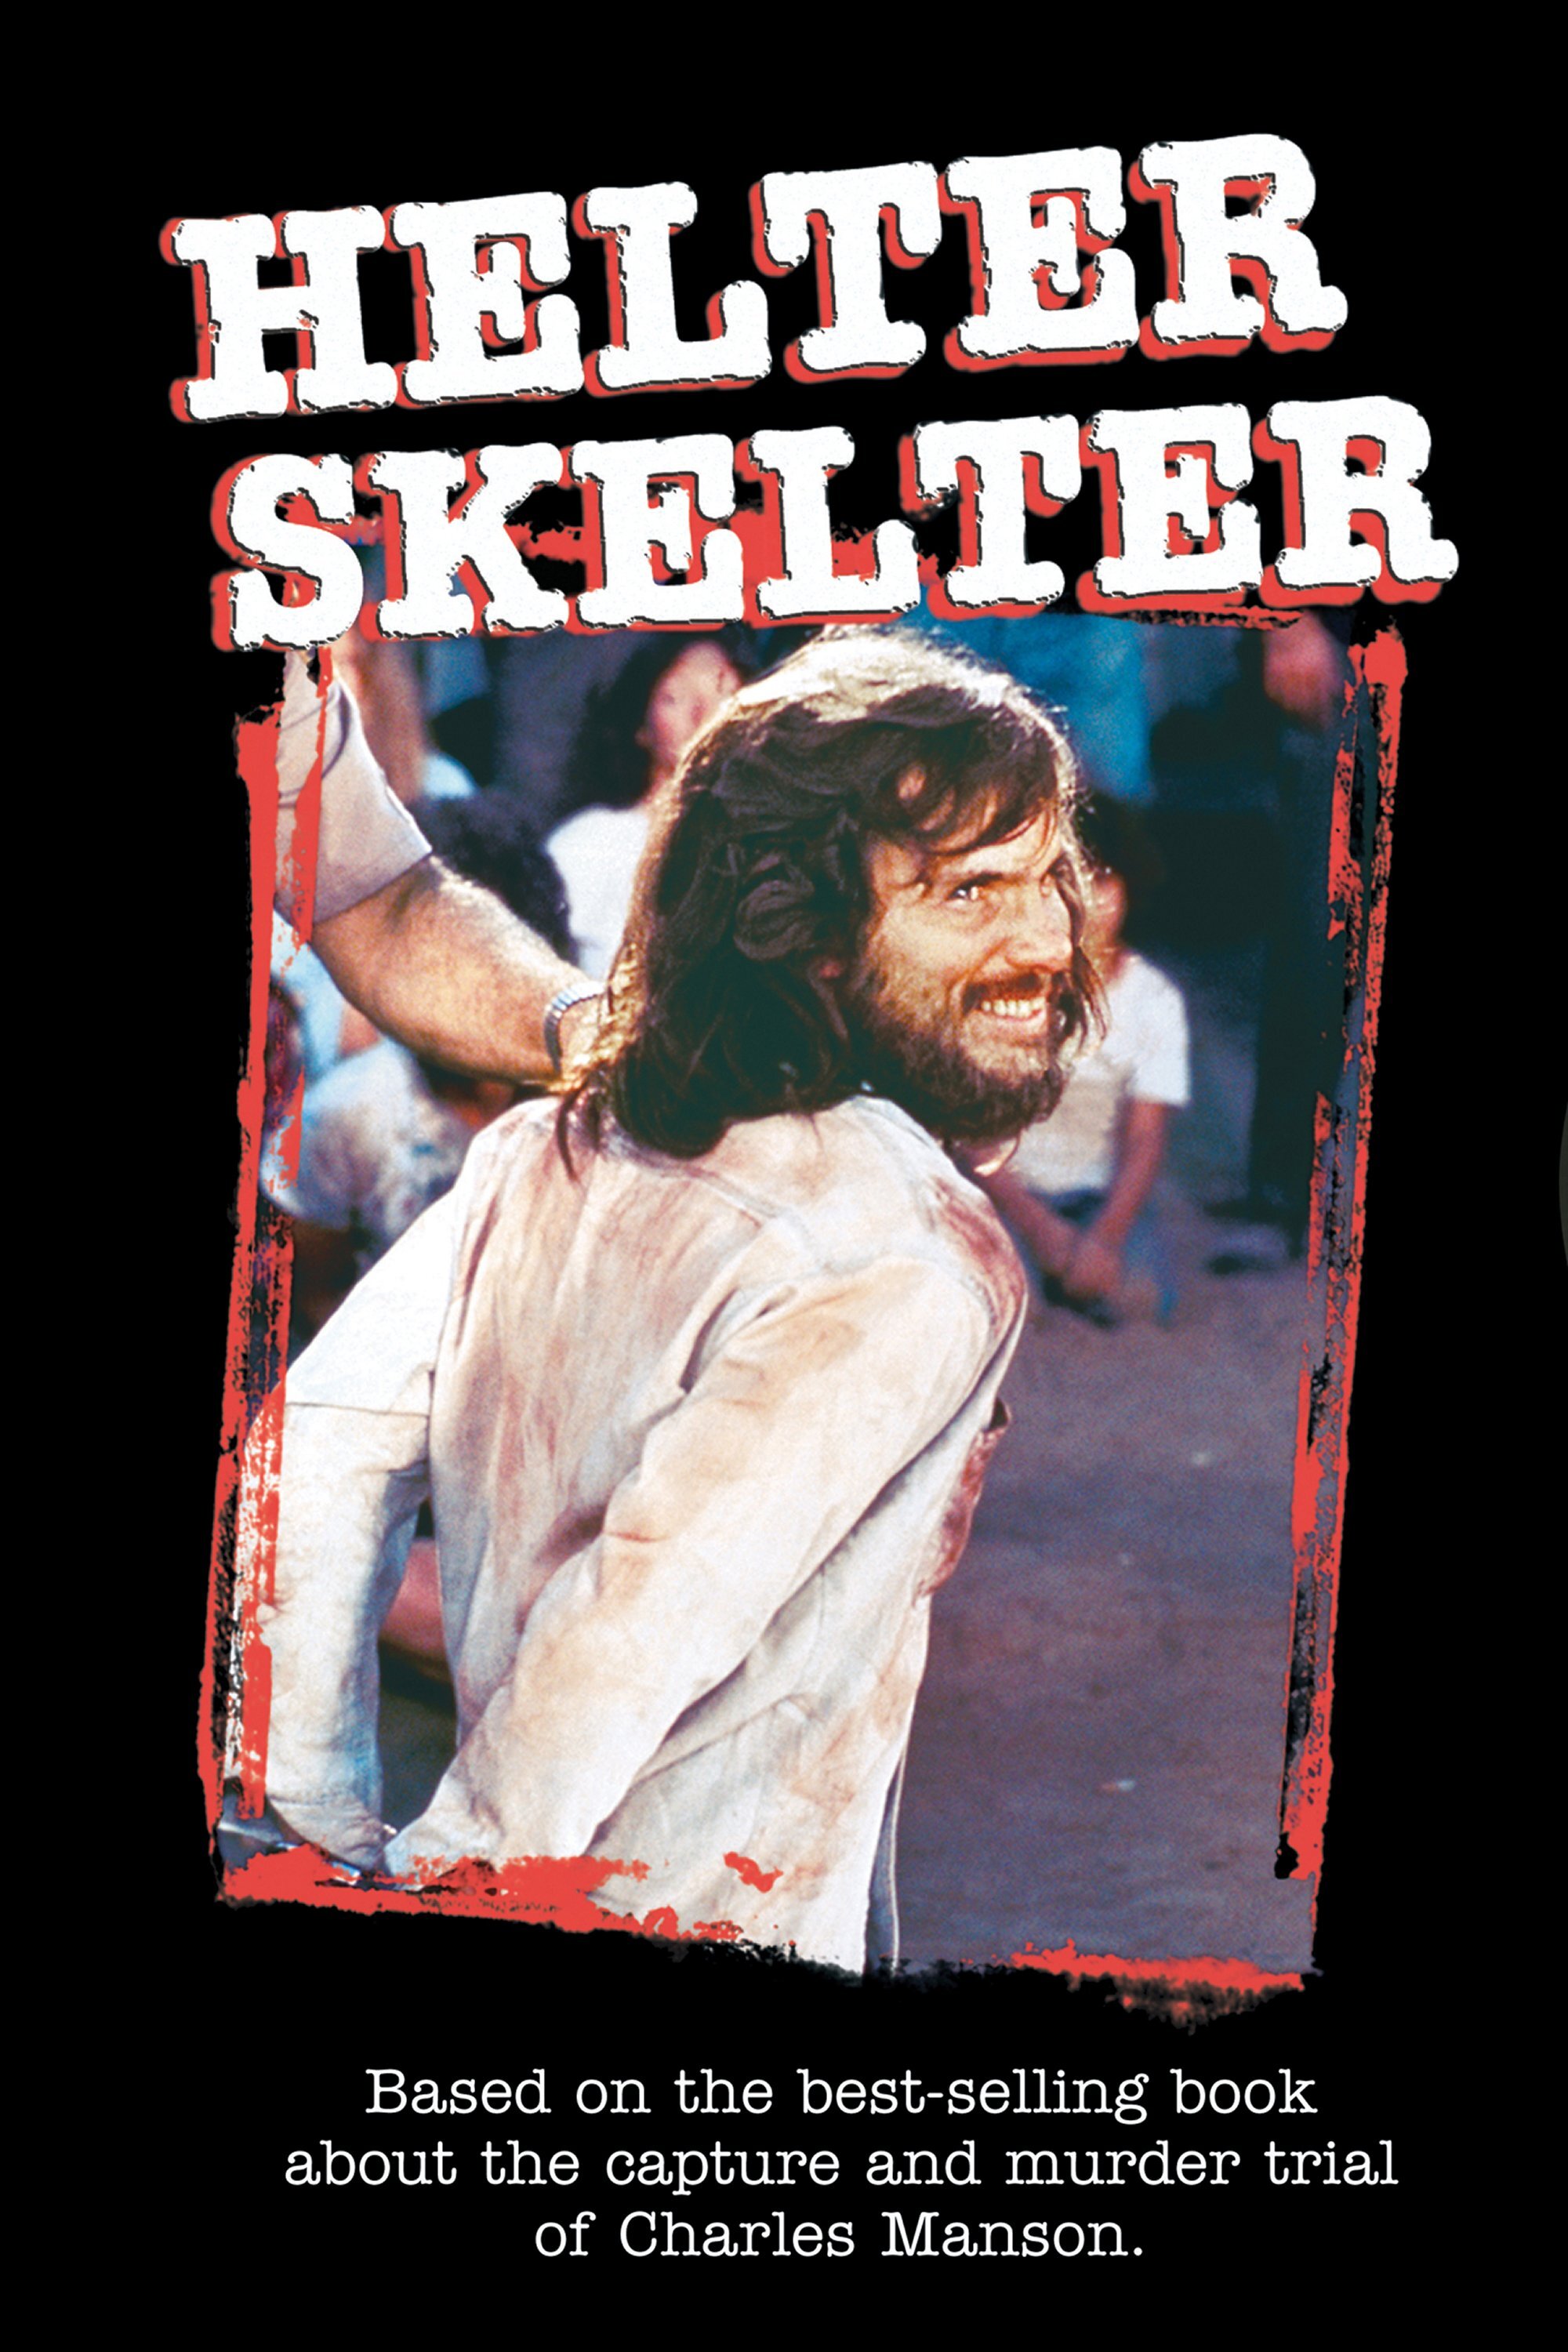 Helter Skelter (DVD Full Screen) - DVD [ 1976 ]  - Drama Movies On DVD - Movies On GRUV